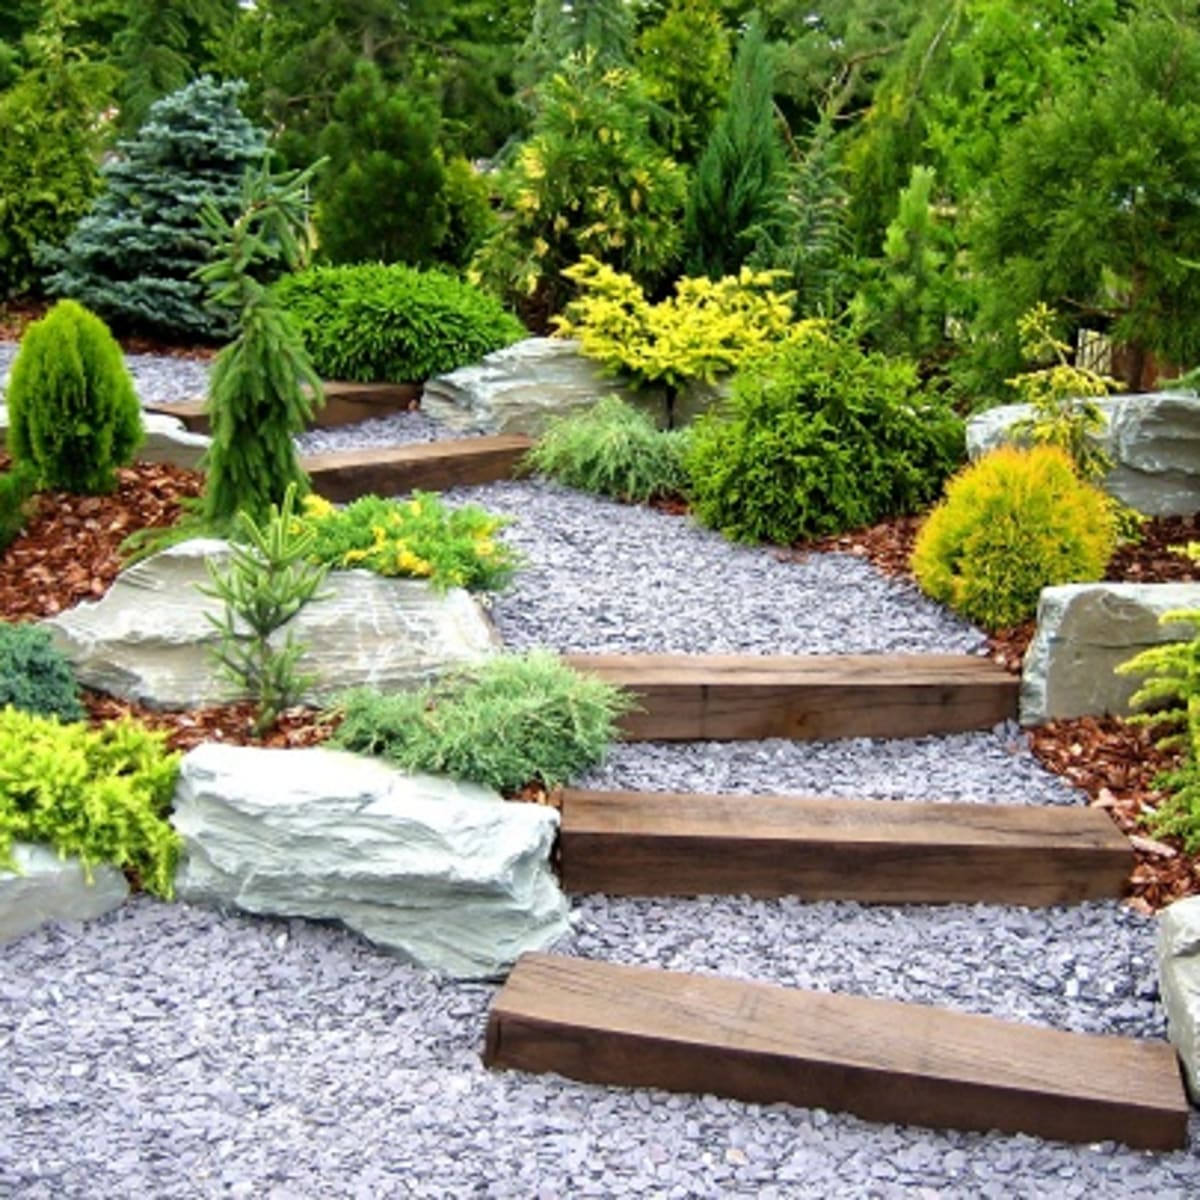 How To Think And Grow Like A Landscape Designer Horticulture